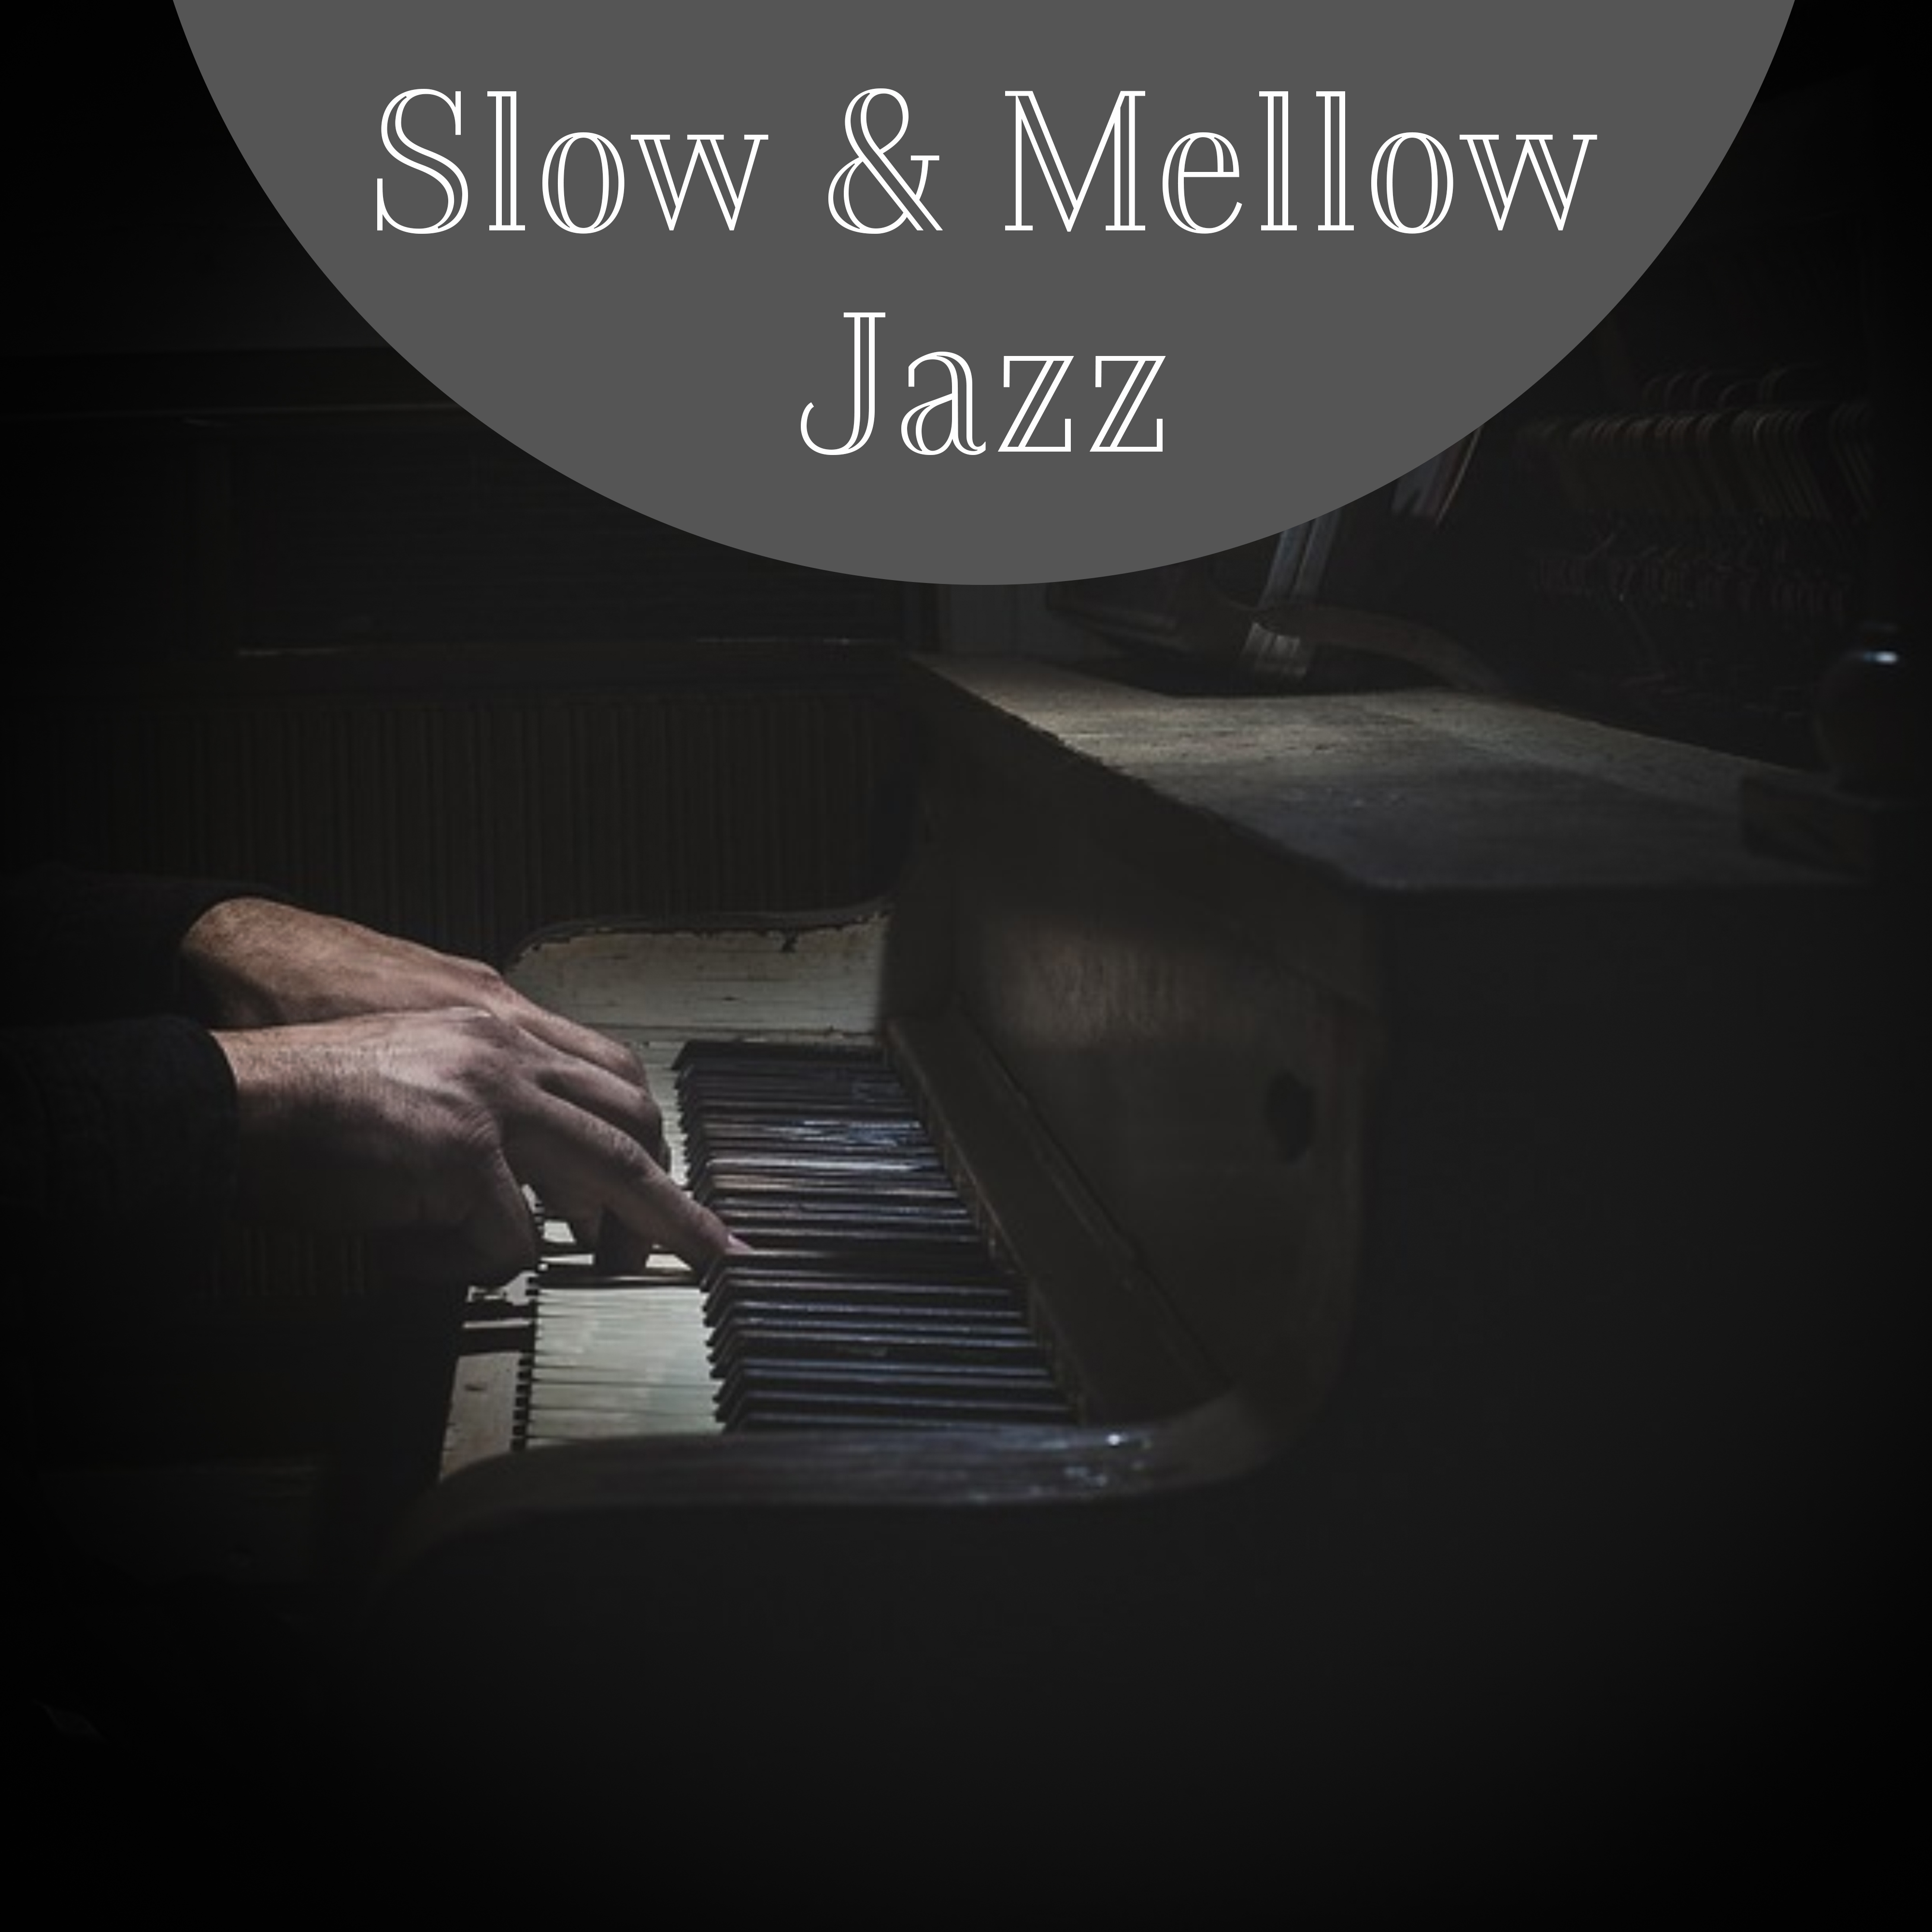 Slow  Mellow Jazz  Chilled Jazz, Calm Down, Stress Relief with Jazz Music, Soft Sounds to Keep Calm